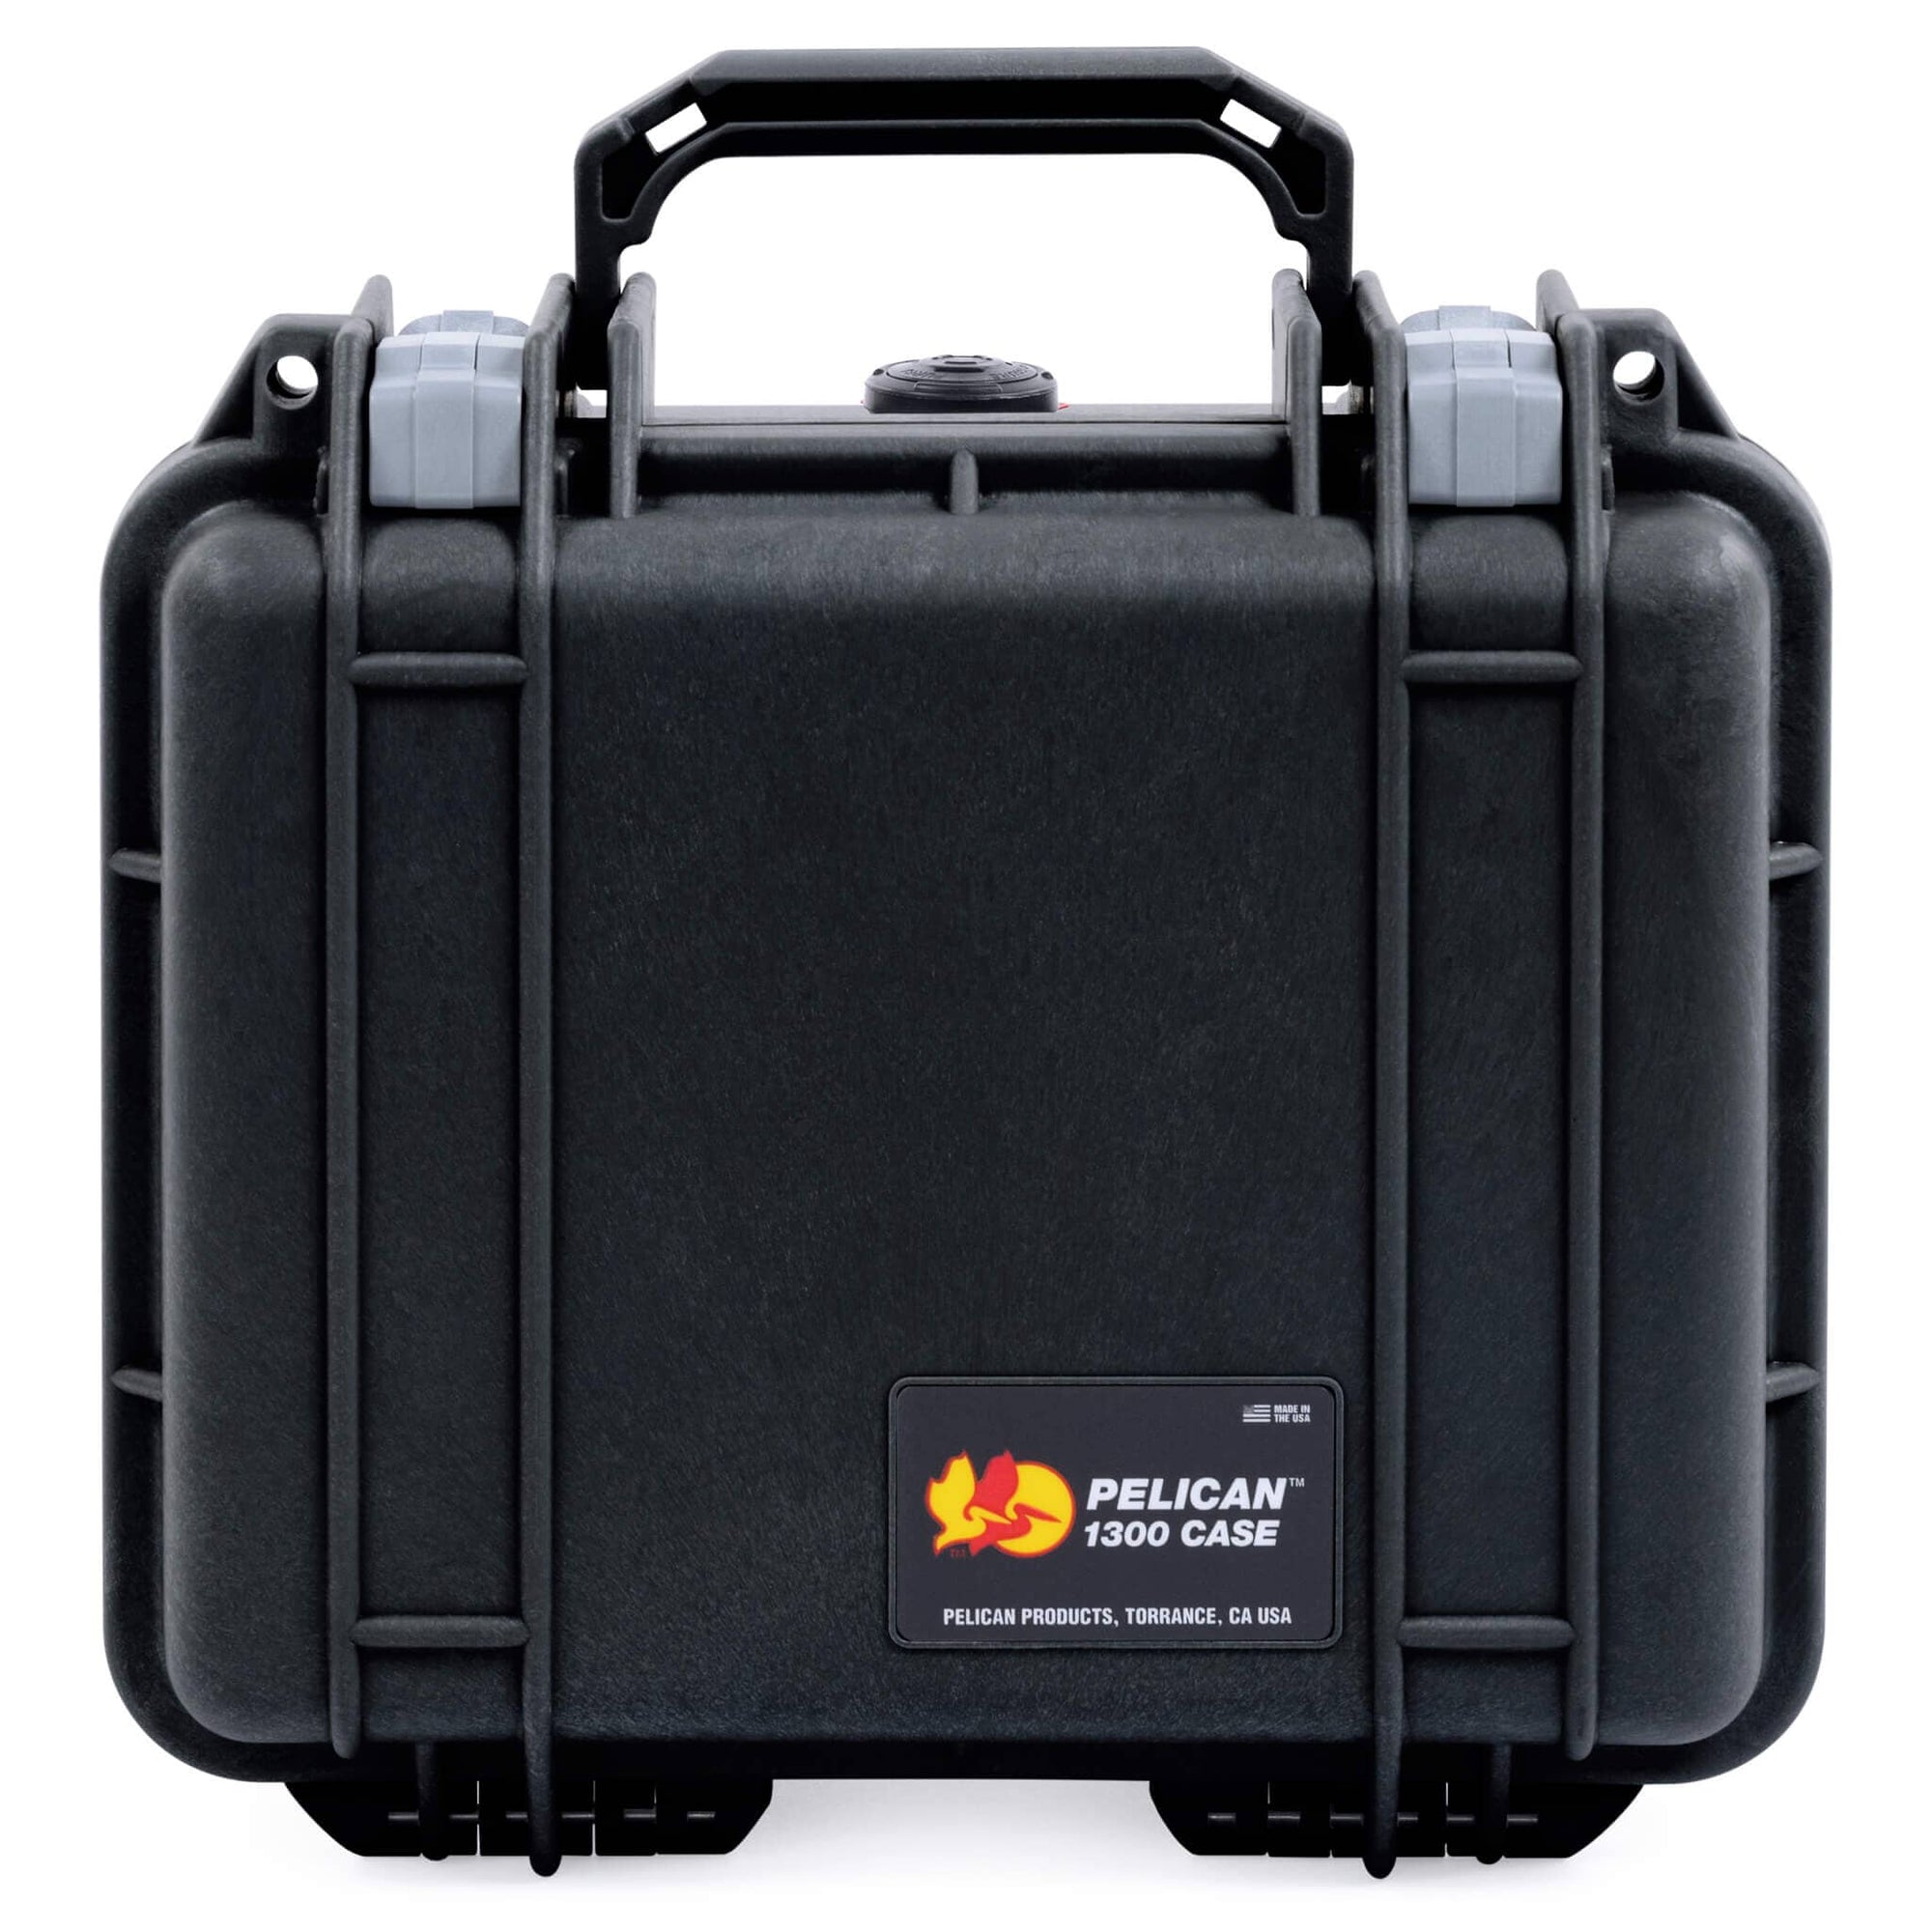 Pelican 1300 Case, Black with Silver Latches ColorCase 